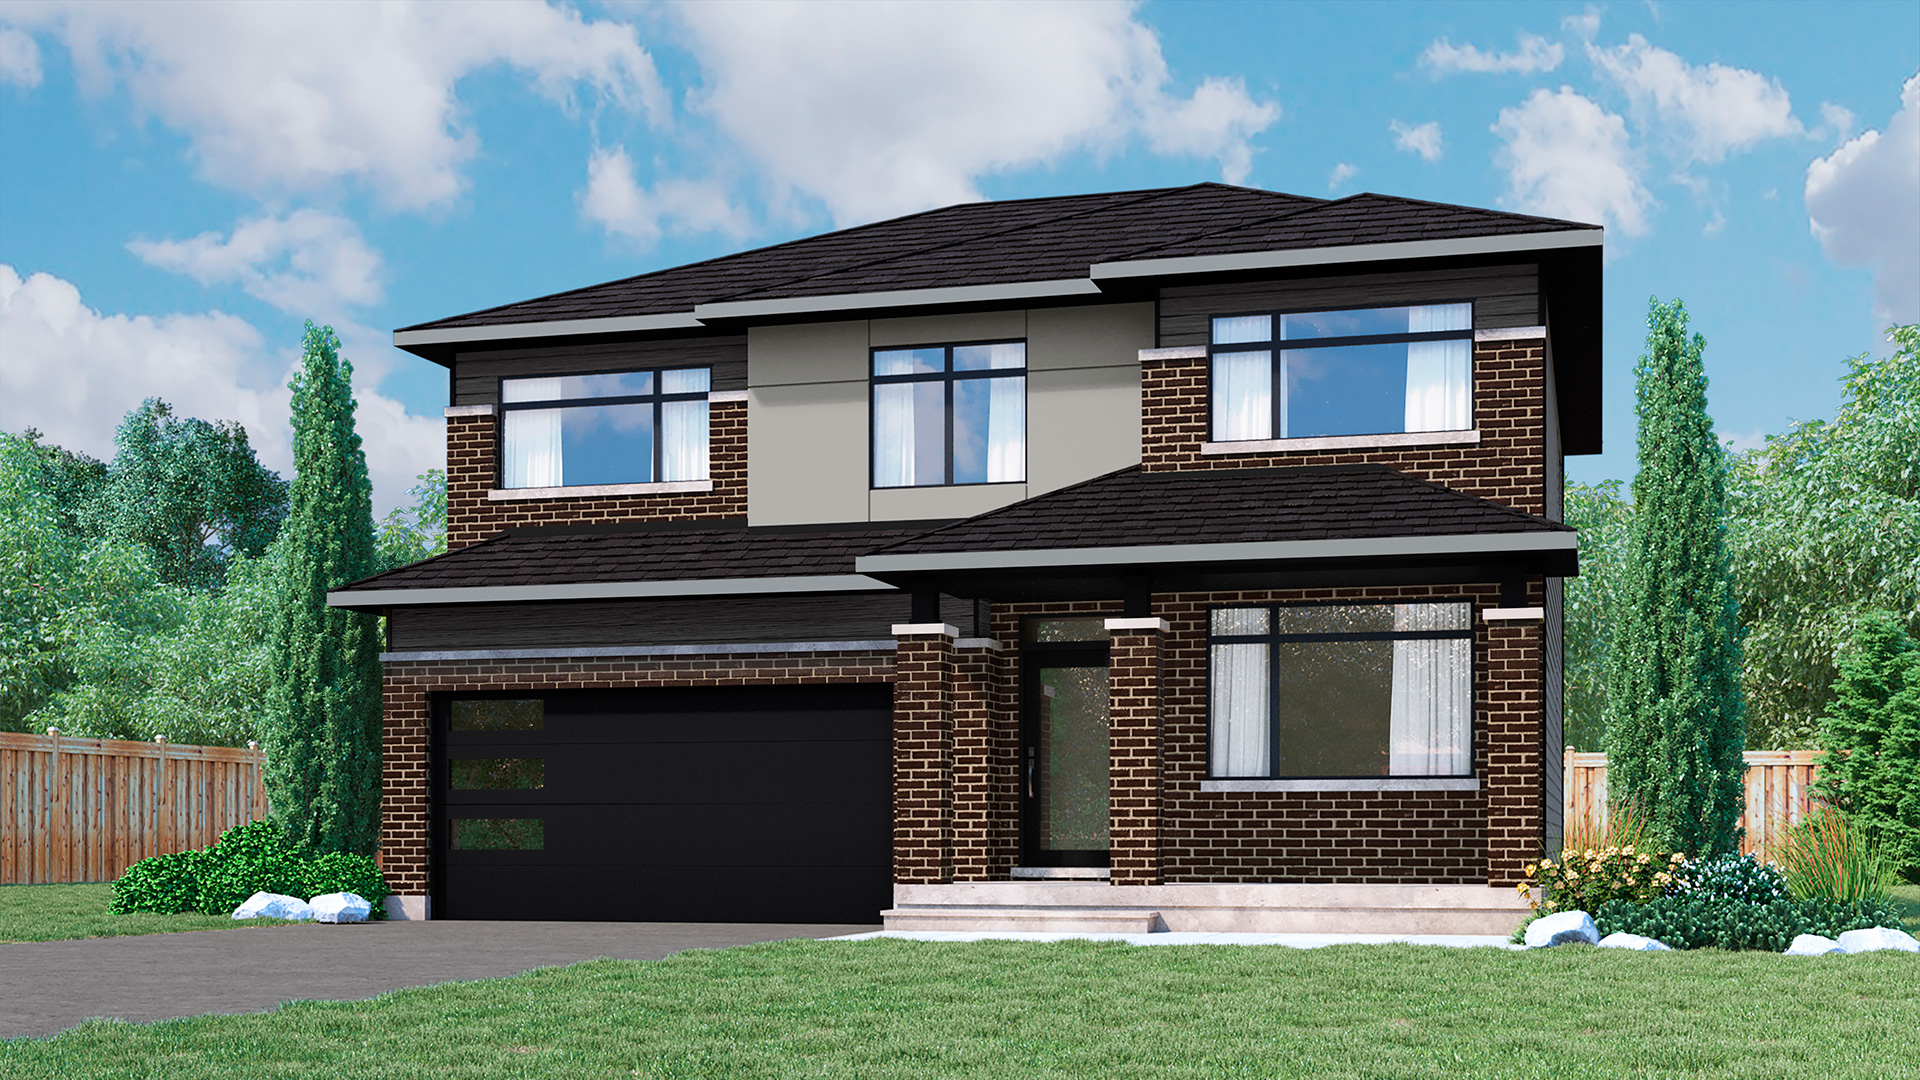 Image of Home Elevation C - Coventry